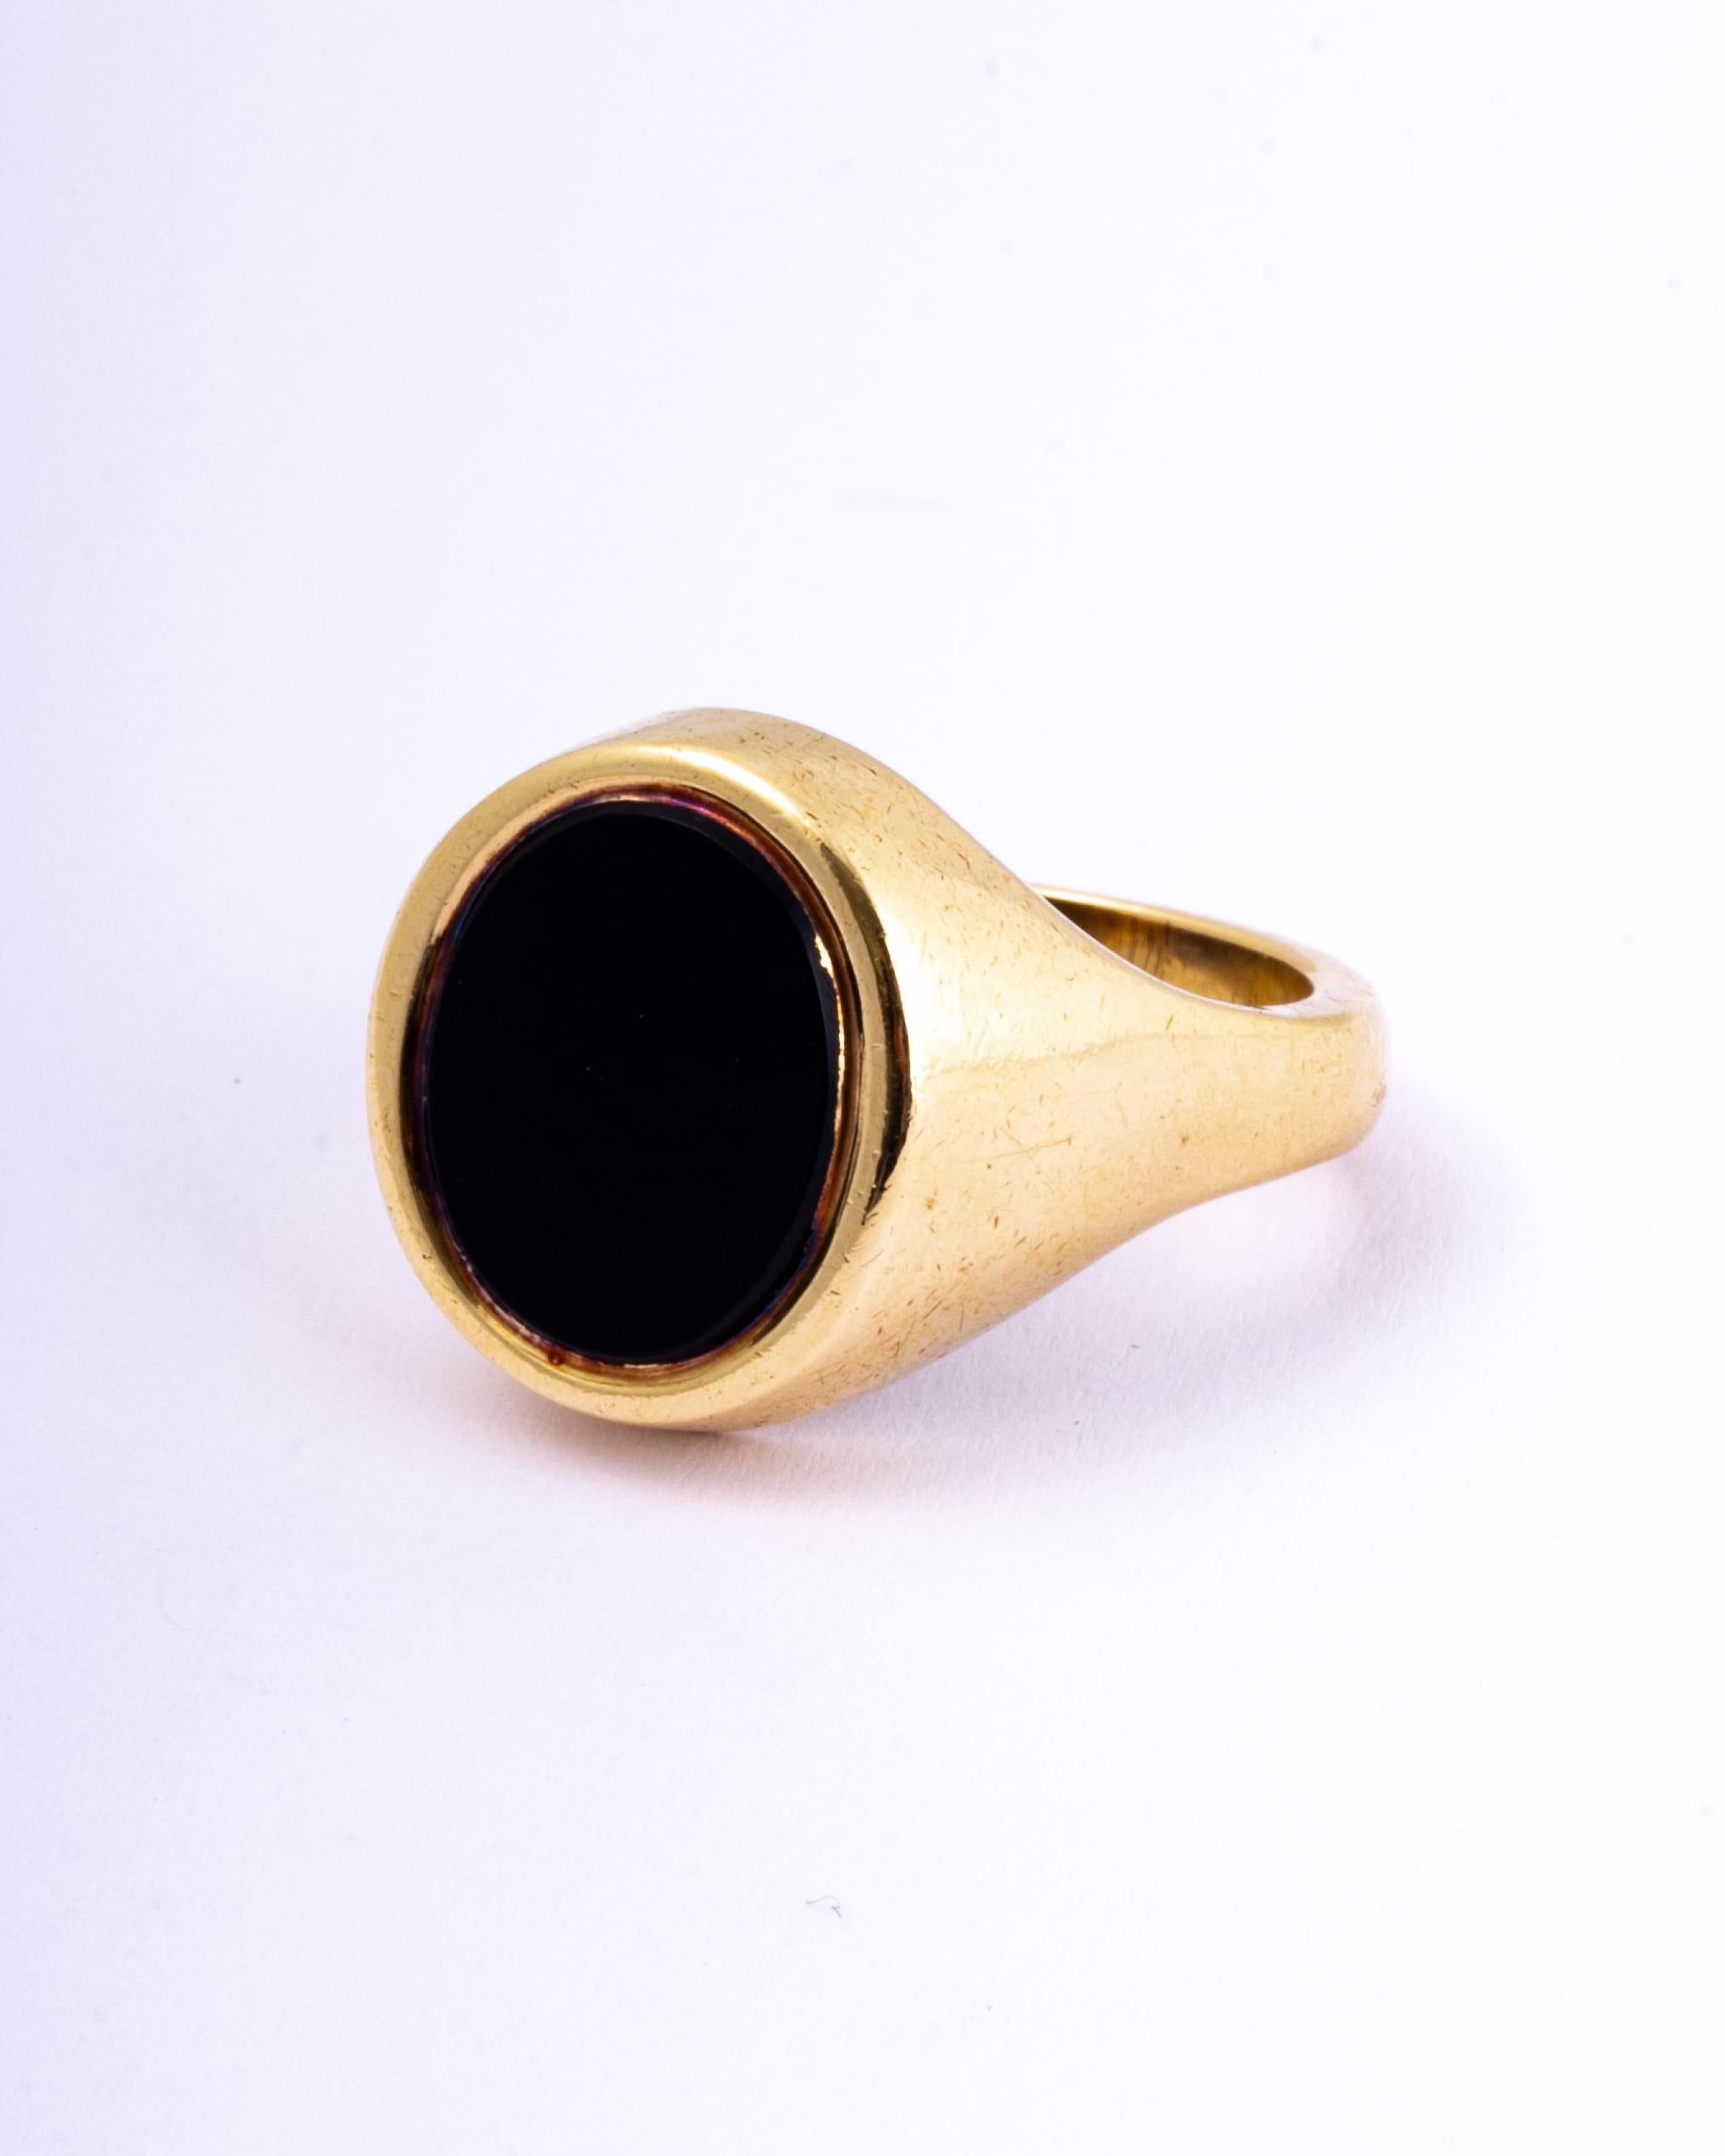 The onyx in this signet ring is in lovely condition and it so glossy! The stone is set within the 9ct gold chunky band.

Ring Size: T 1/2 or 9 3/4
Stone Dimensions: 14x12mm 

Weight: 11.1g